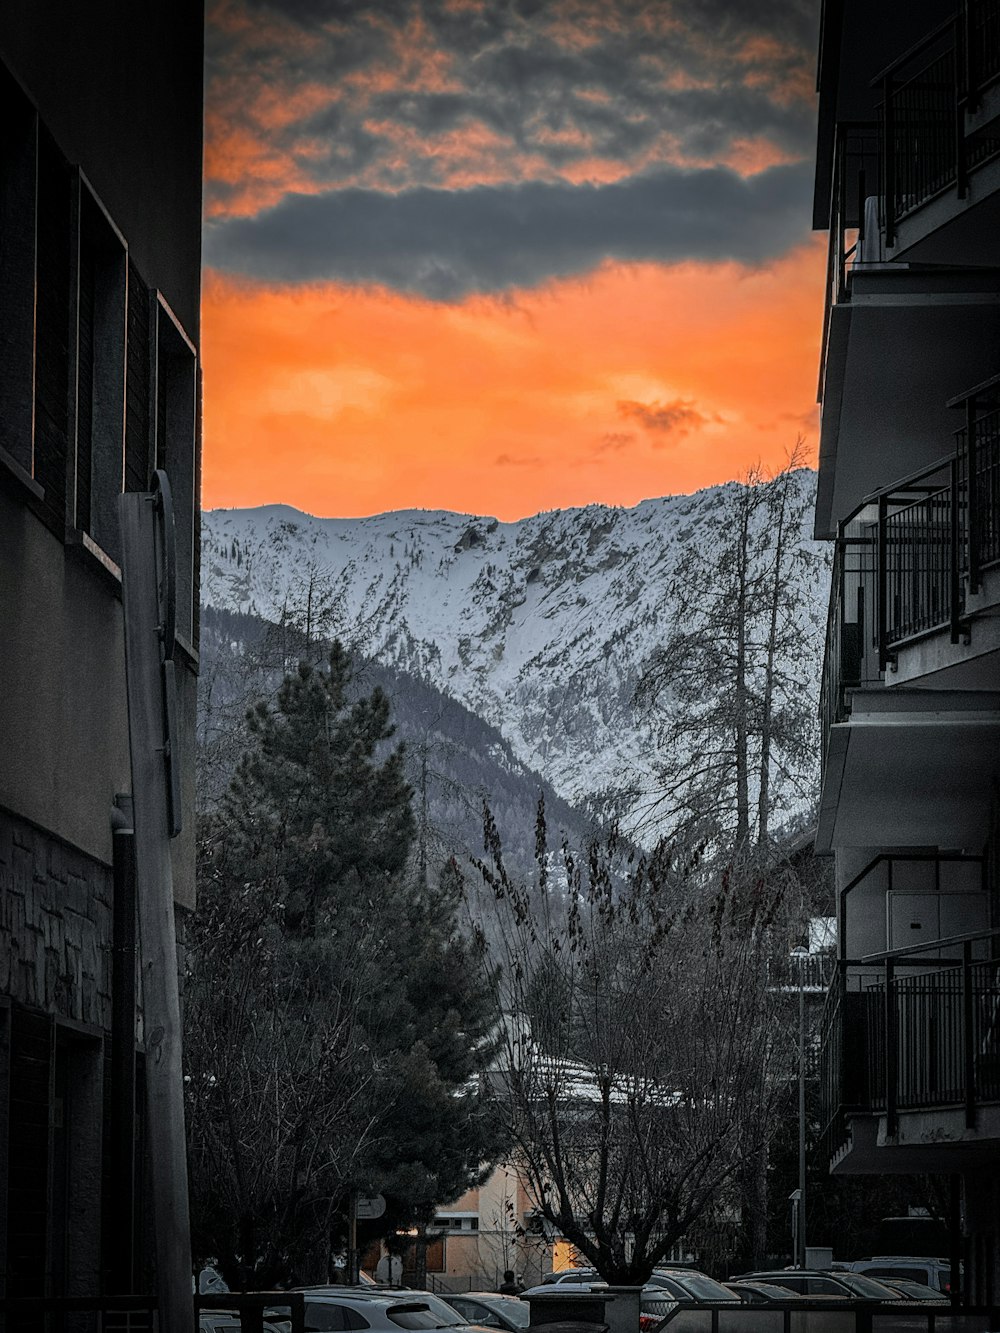 a view of a snowy mountain range from an apartment building